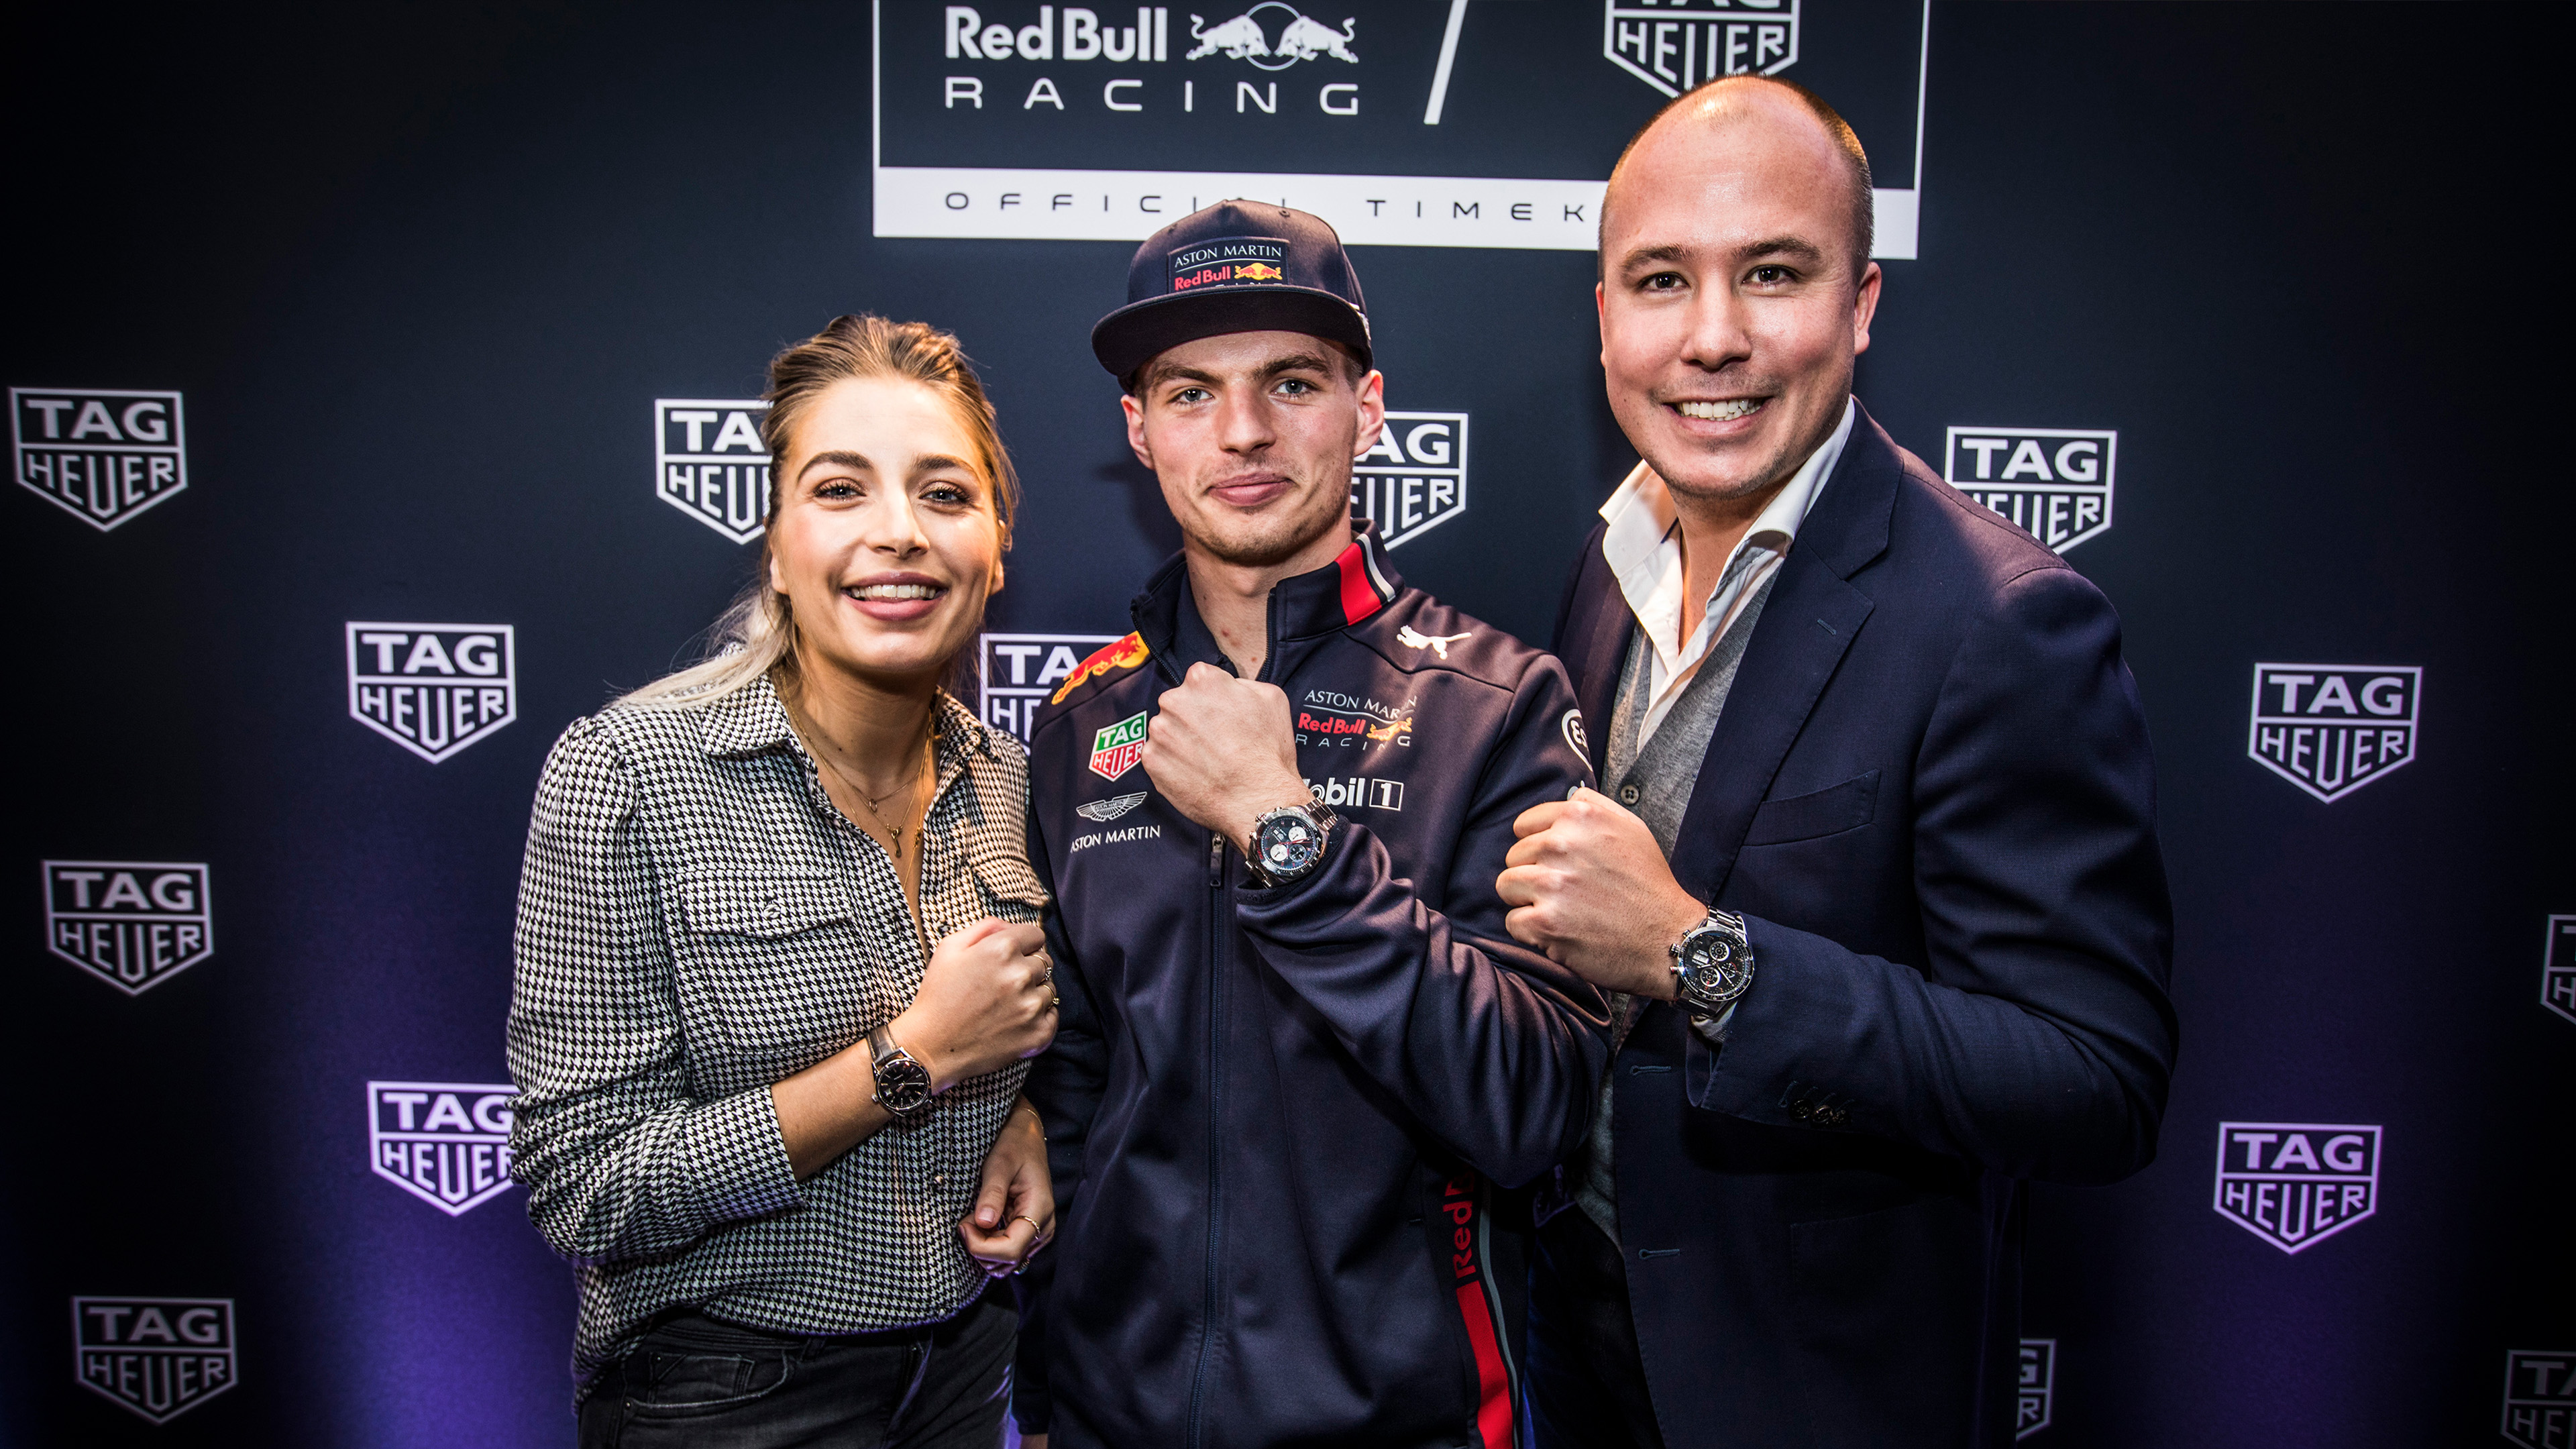 TAG Heuer launch event Max Verstappen Watch Edition 2019